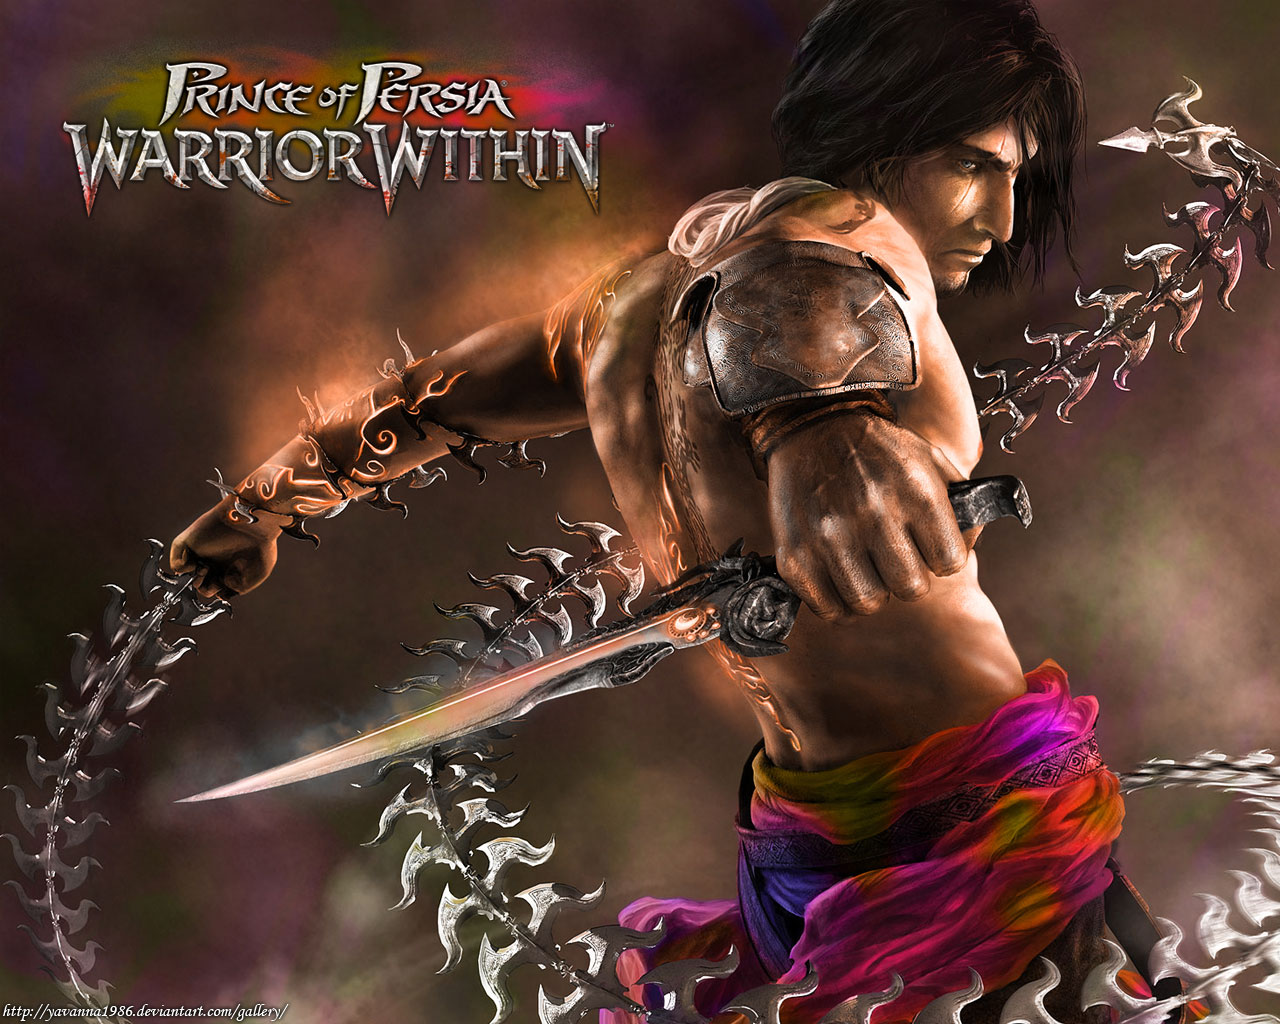  download Prince of persia Wallpapers and Backgrounds 1280x1024